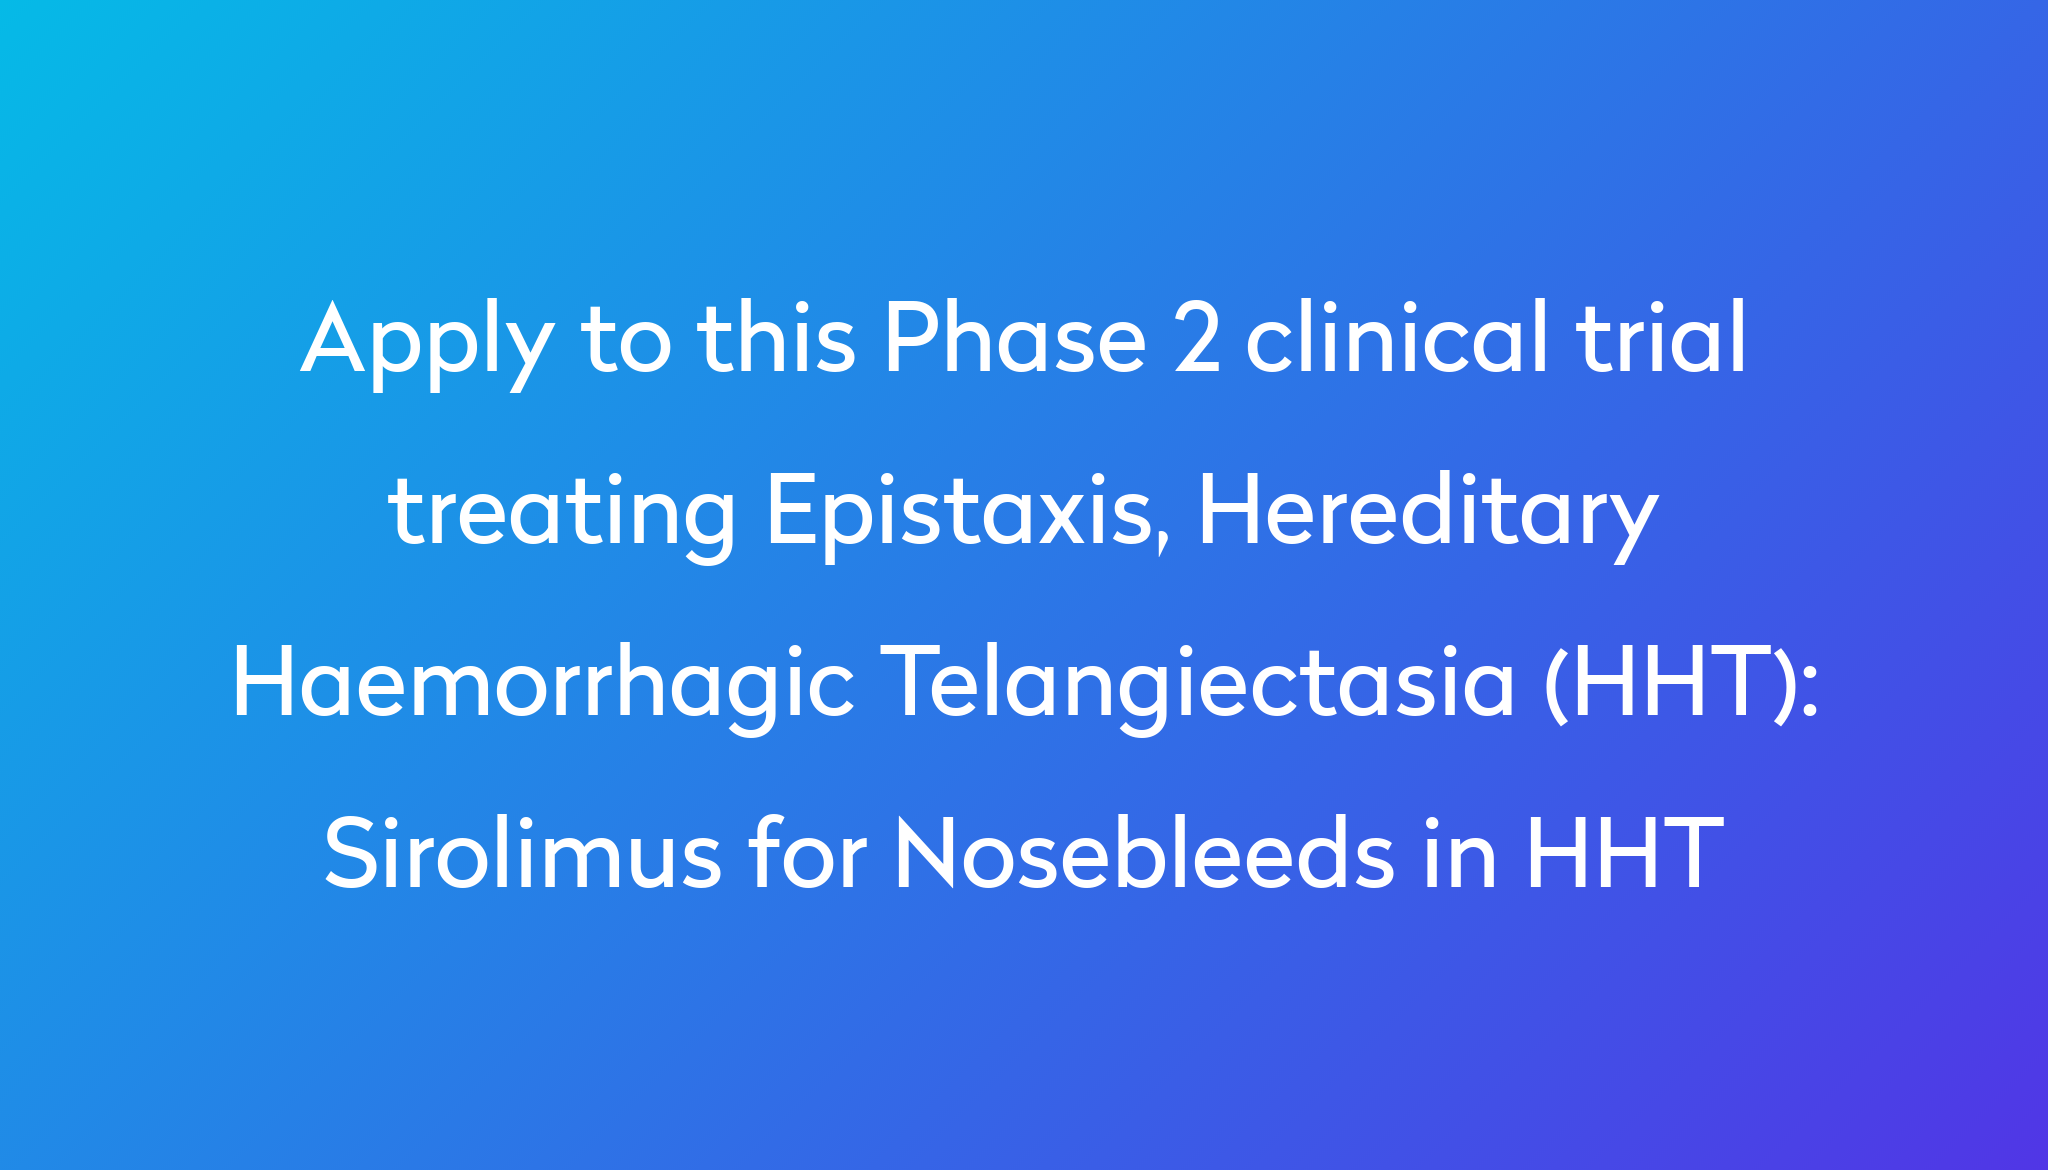 Sirolimus for Nosebleeds in HHT Clinical Trial 2024 Power